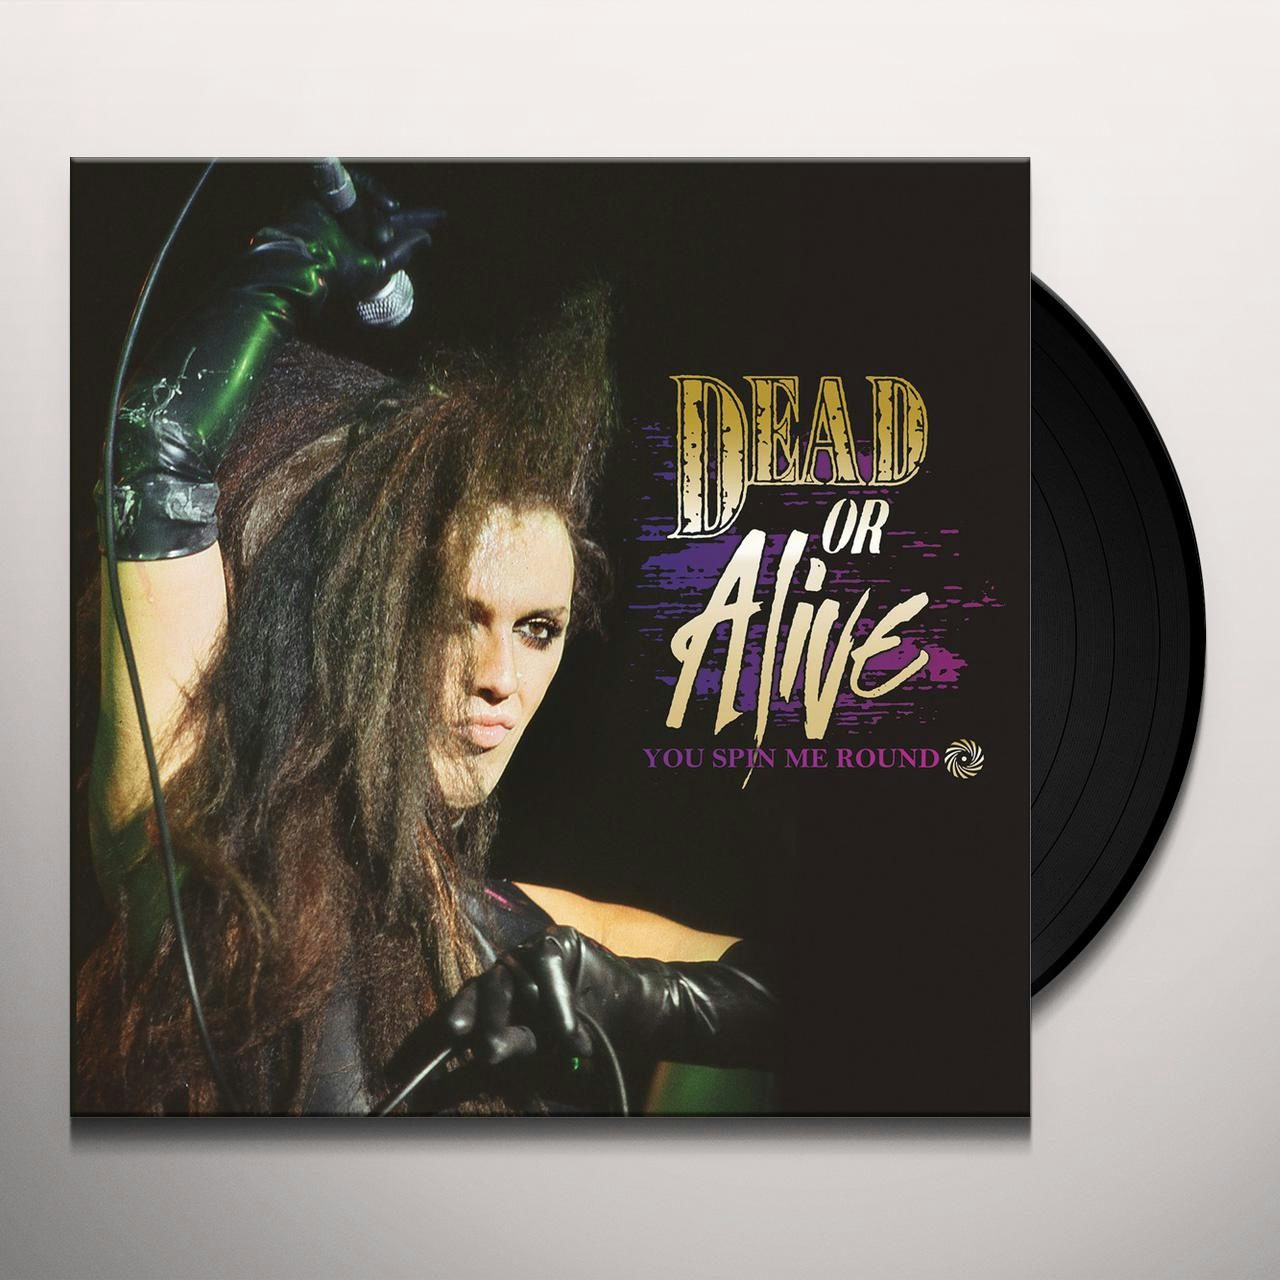 You Spin me Round. Dead or Alive - you Spin me Round (like a record). Spin me Round 2022. Dead or Alive 1987 you Spin me Round 2021 после операций.